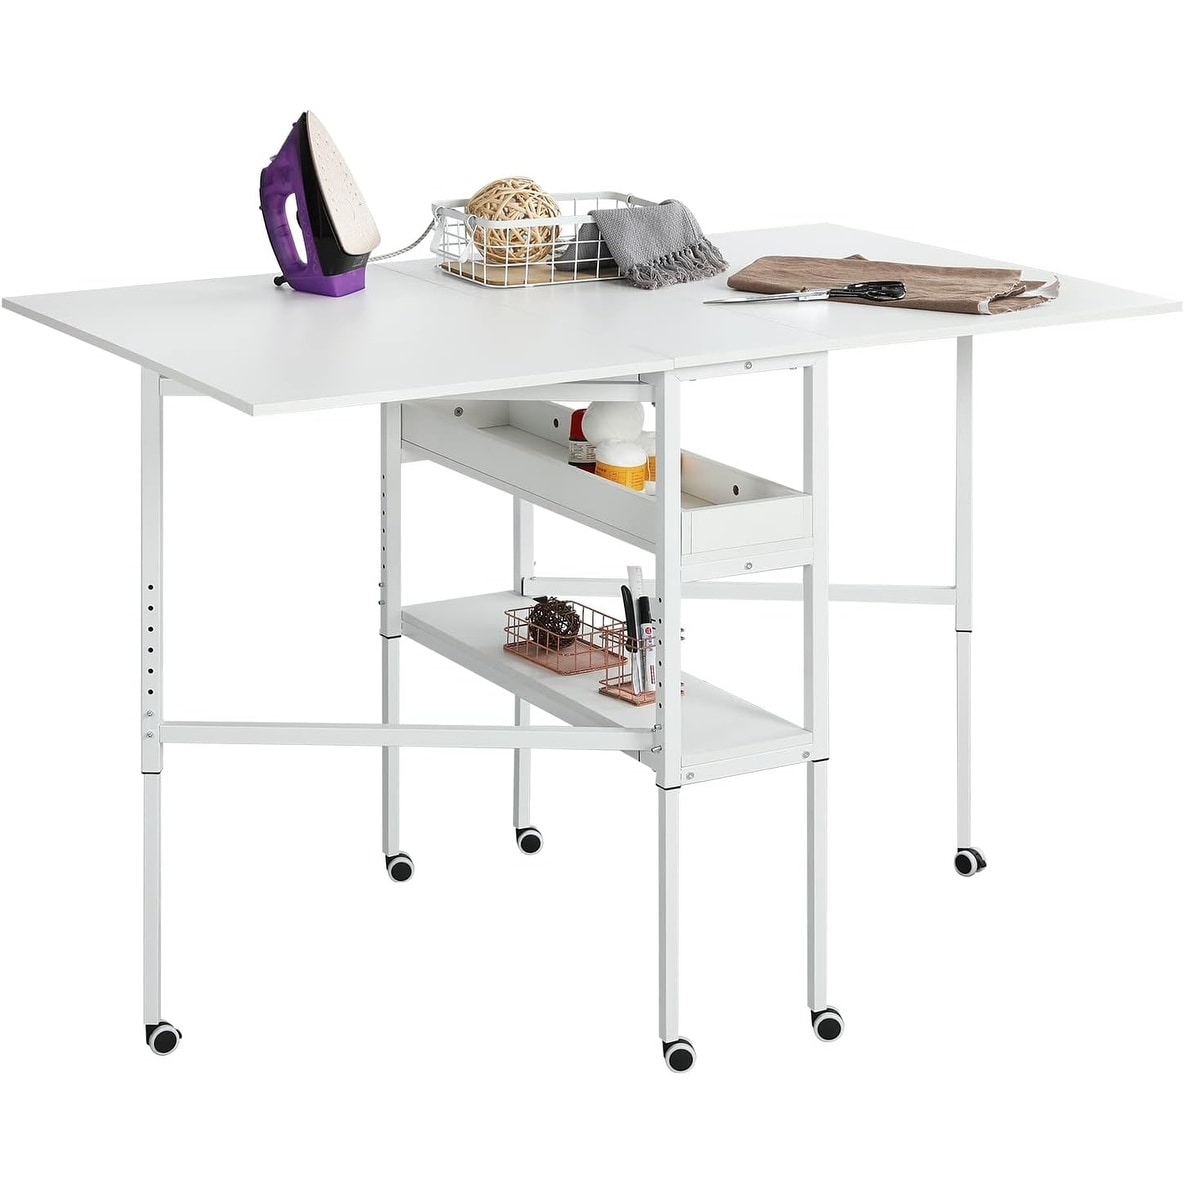 Height Adjustable Craft Table with Storage Shelves, Mobile Folding Cutting  Table for Home Office Sewing Room Craft Room